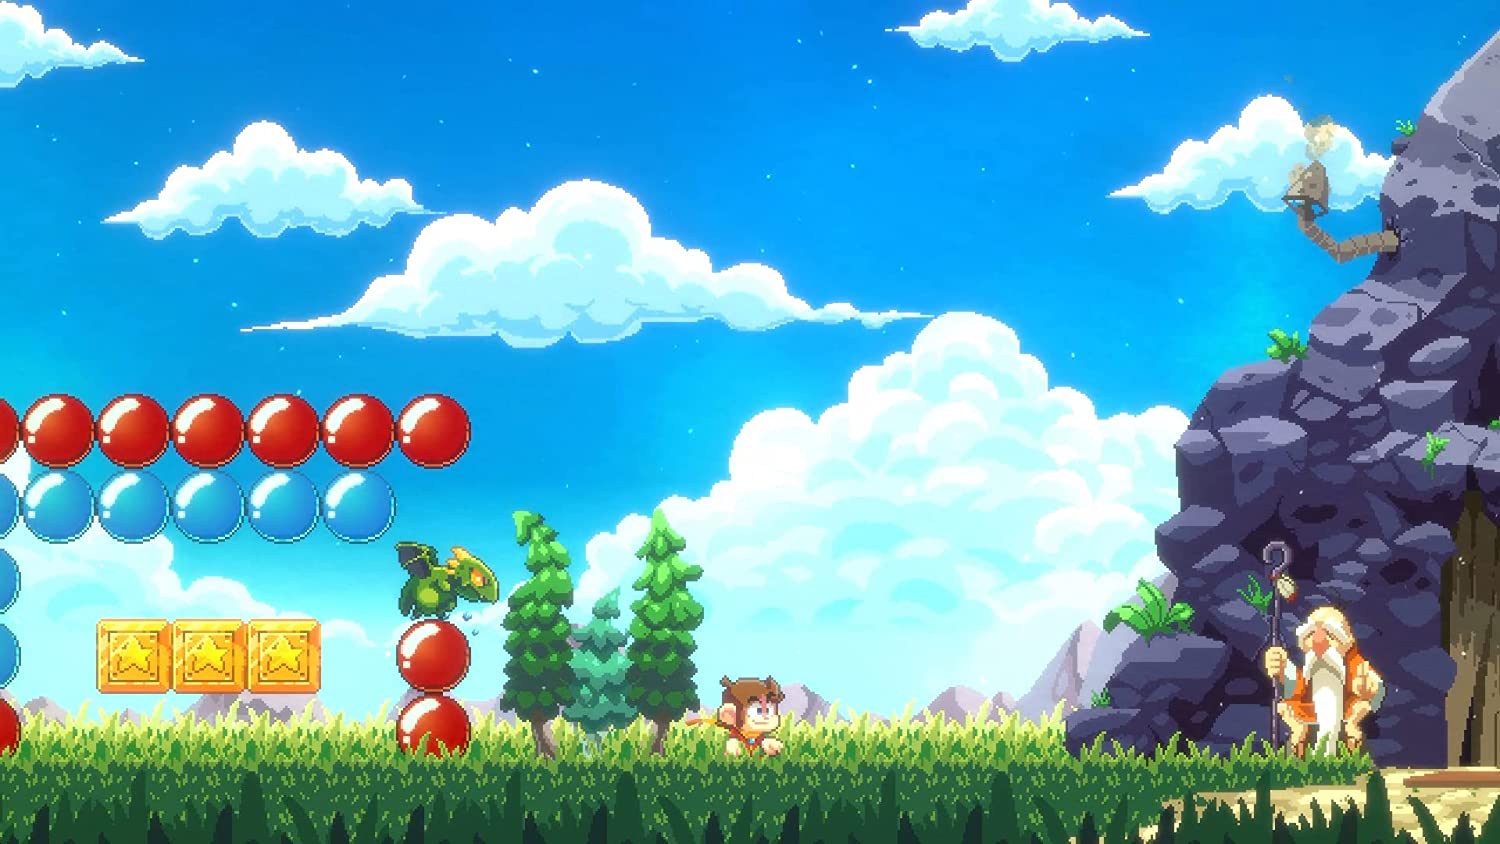 Alex Kidd in Miracle World DX (Nintendo Switch)